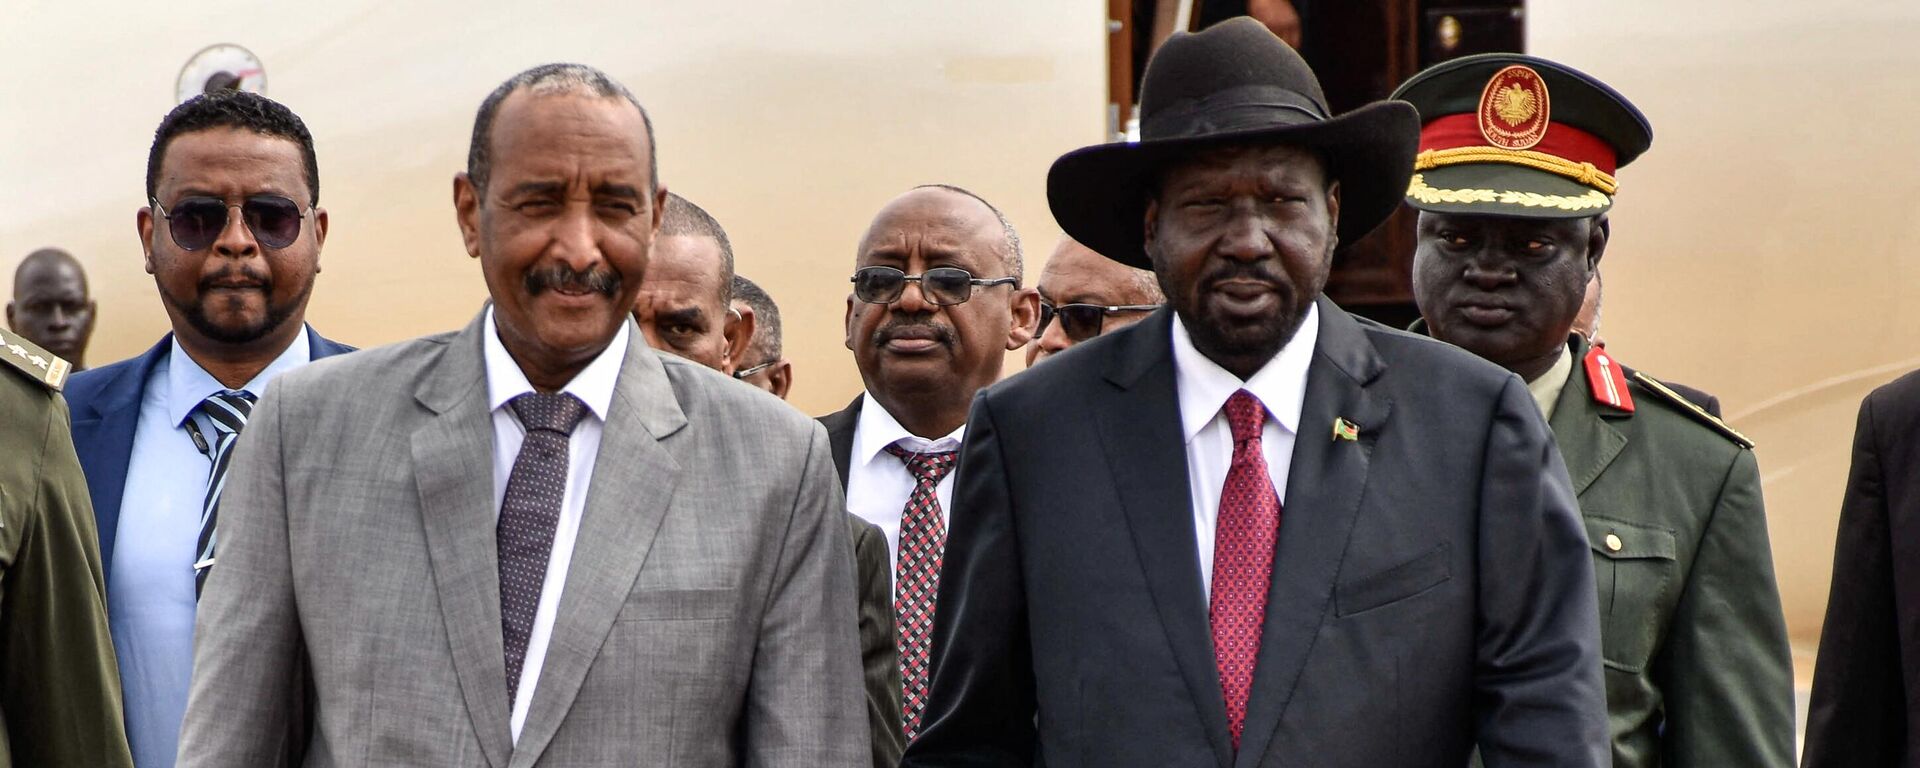 President of Sudanese Transitional Council General Abdel Fattah al-Burhan (L) is welcomed by President of South Sudan Salva Kiir (R) at his arrival for the summit to endorse the peace talks between Sudan's government and rebel leaders in Juba, South Sudan, on October 14, 2019. - Sputnik International, 1920, 13.01.2023